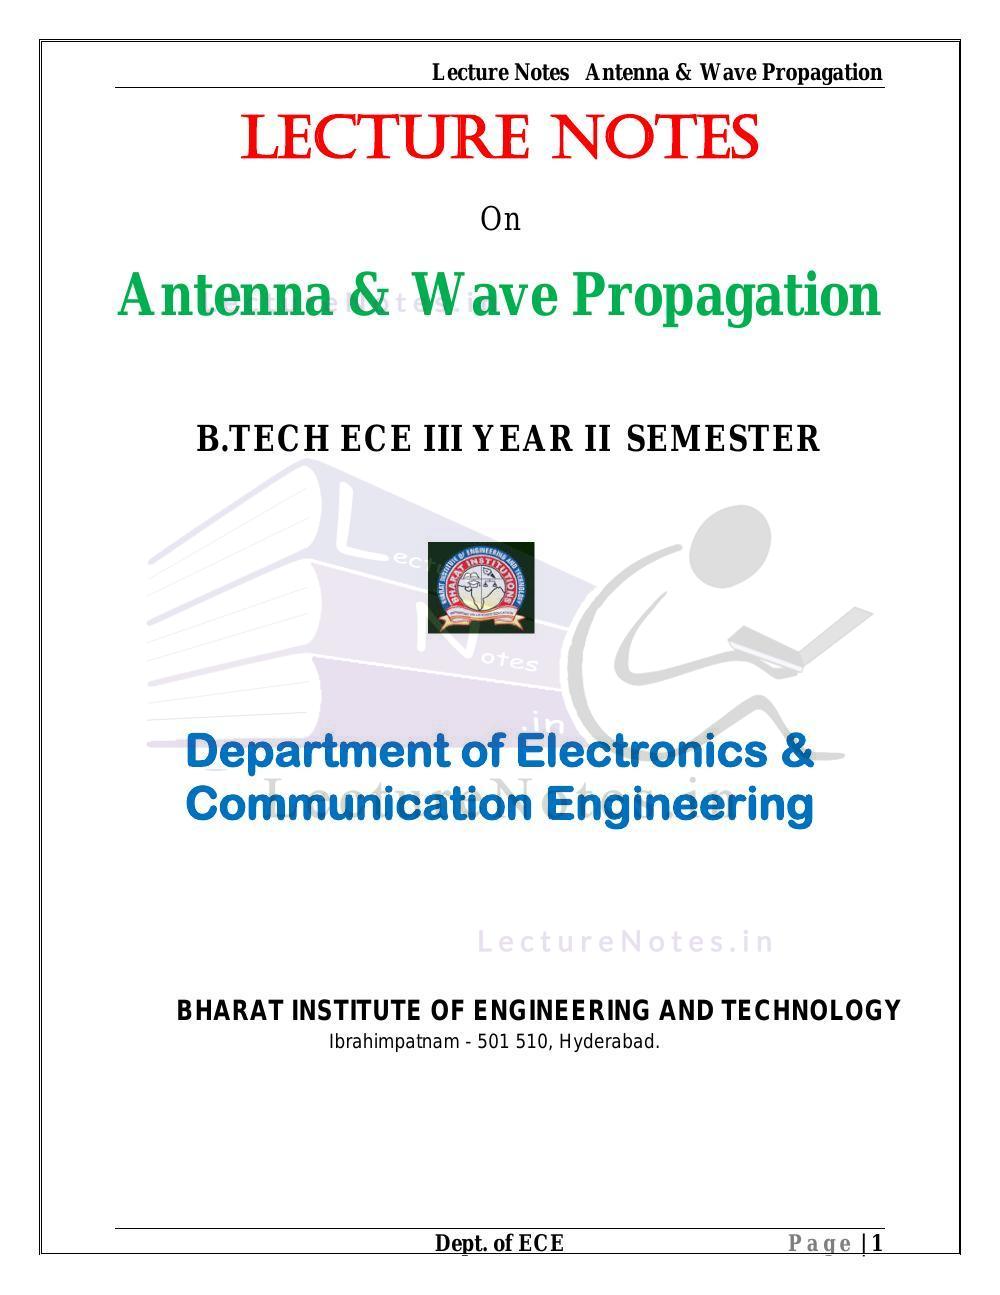 antennas and wave propagation lab manual